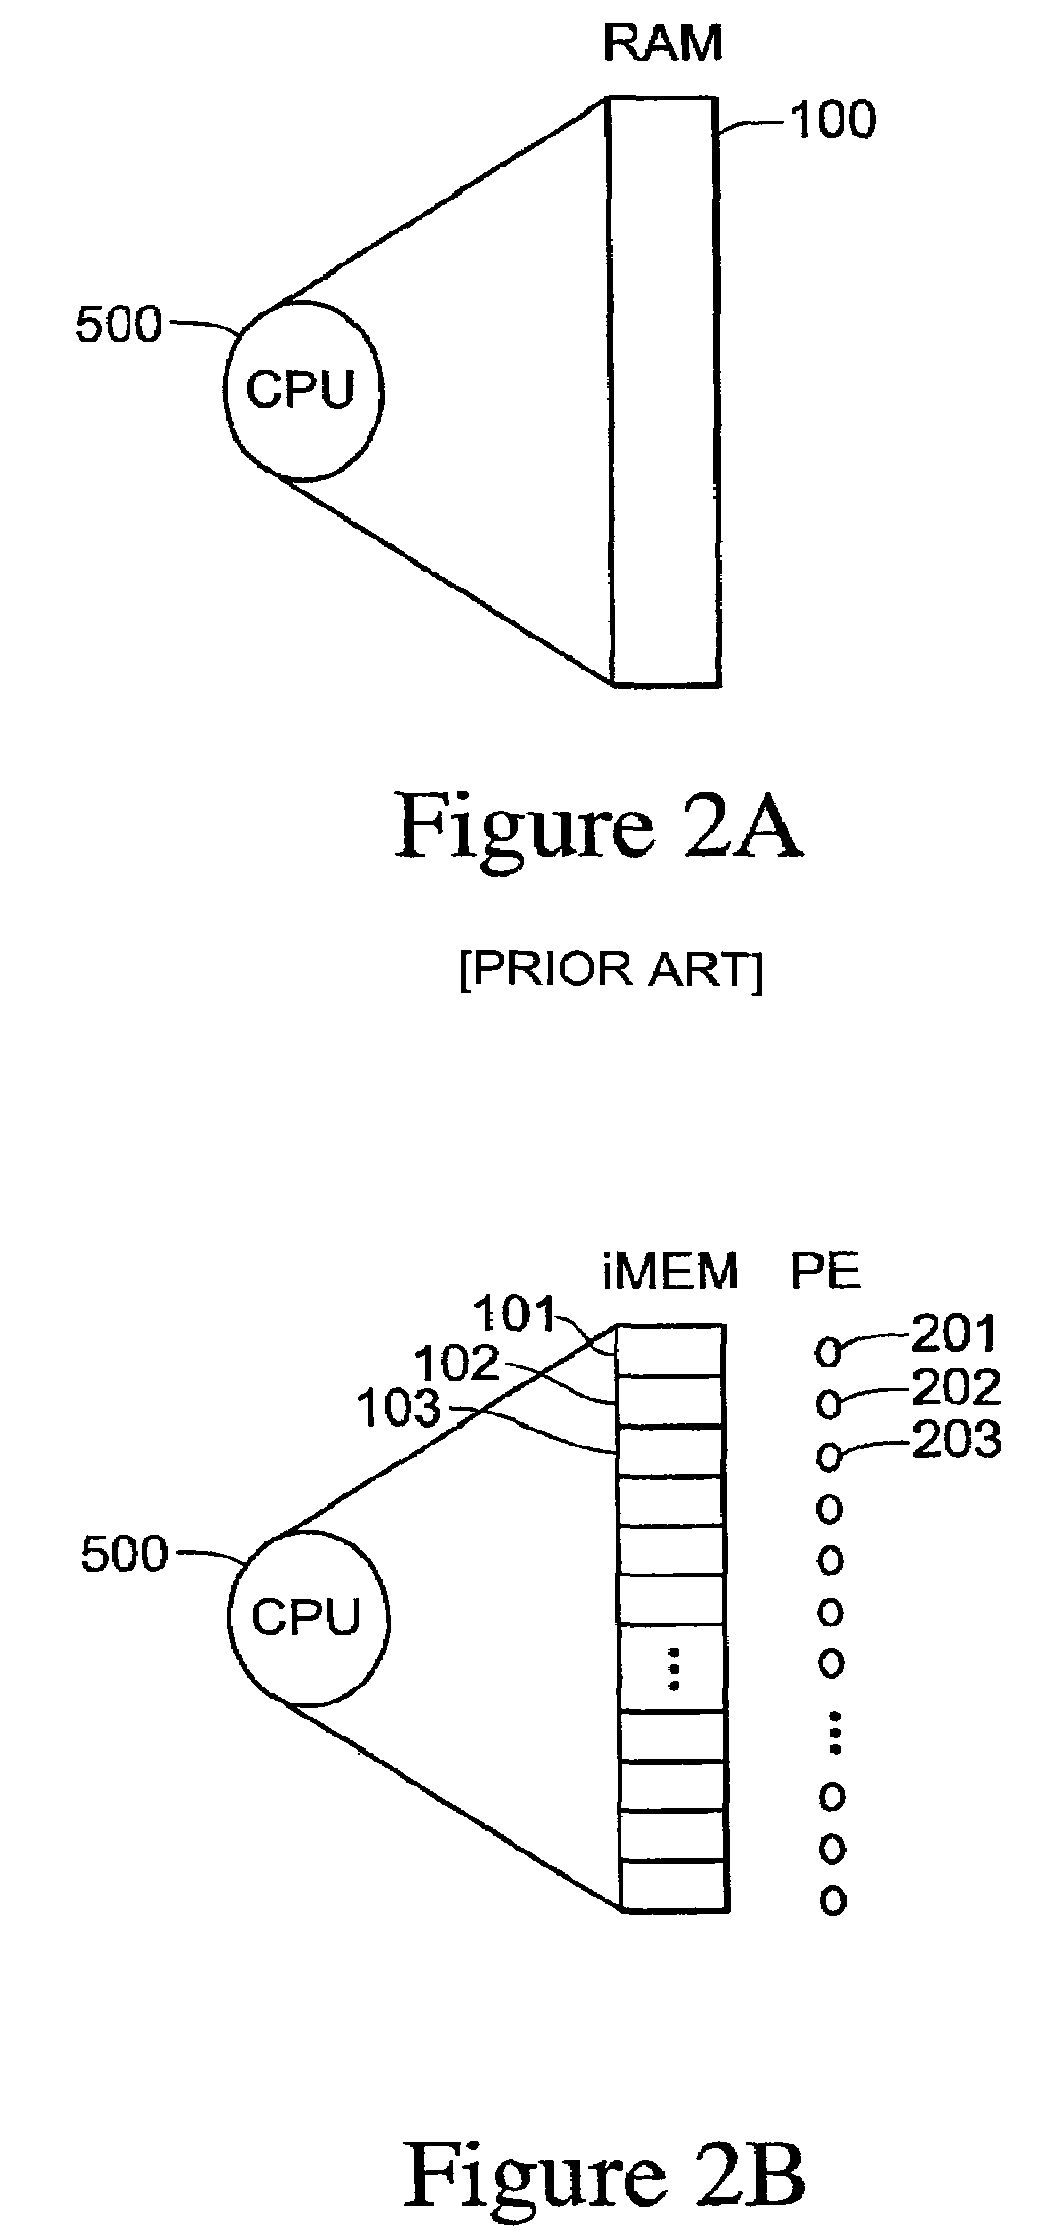 Intelligent memory device with variable size task architecture